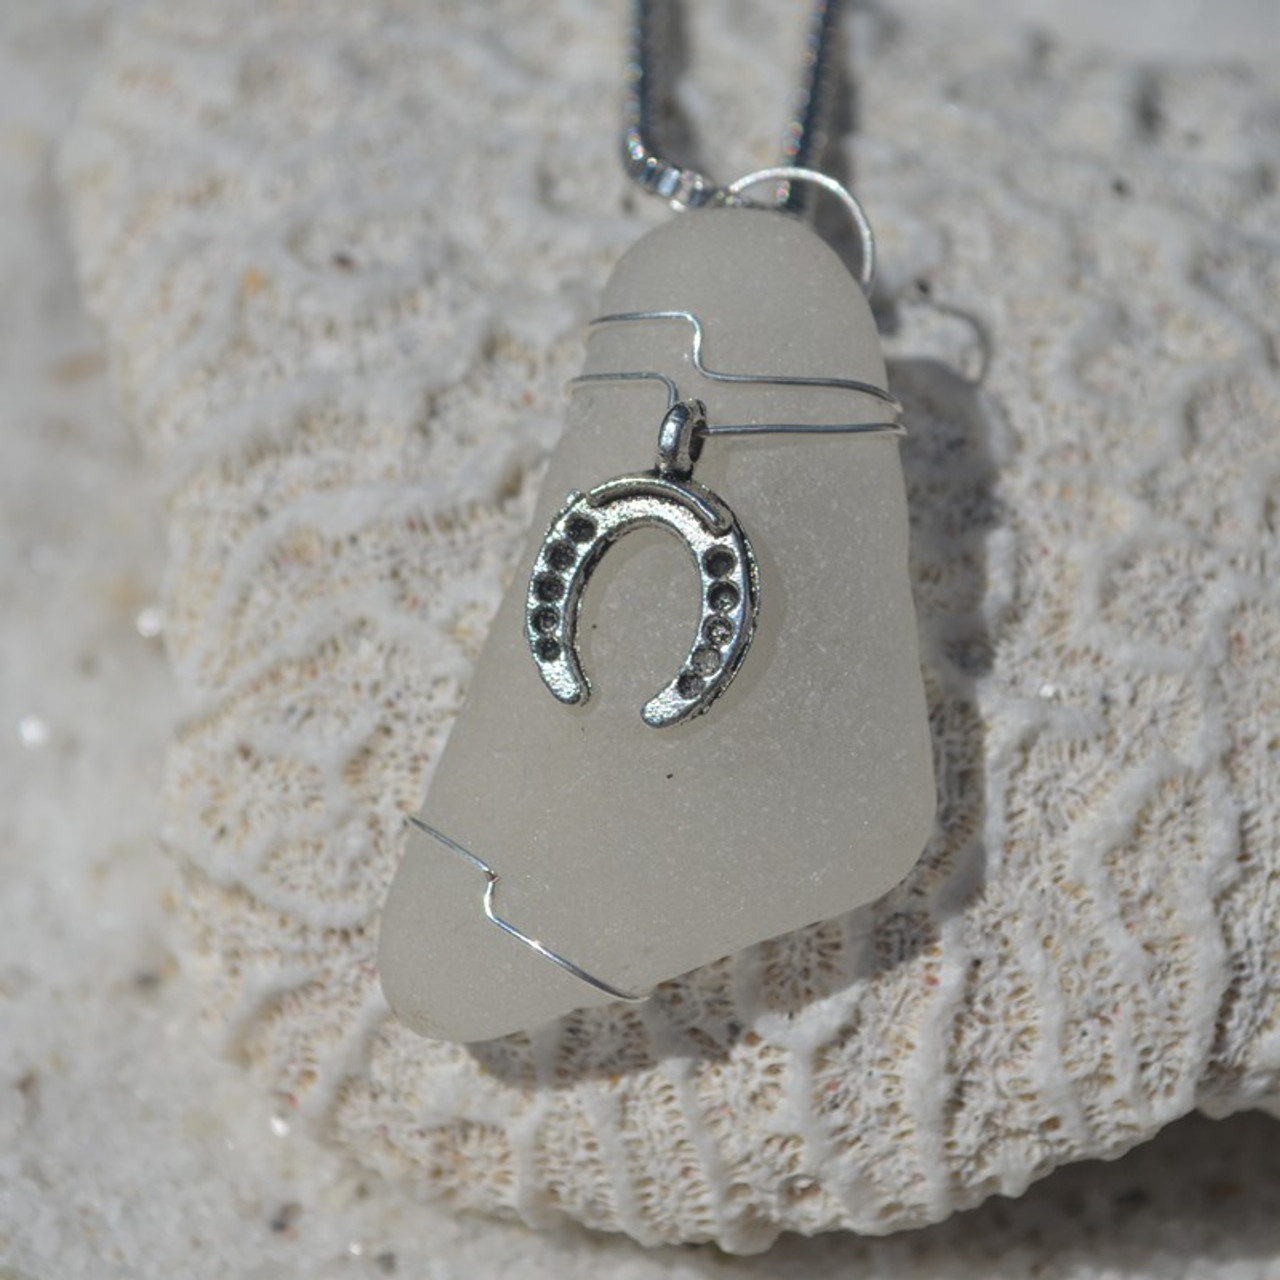 Custom Handmade Genuine Sea Glass Necklace with a Silver Horseshoe Charm - Choose the Color - Frosted, Green, Brown, or Aqua